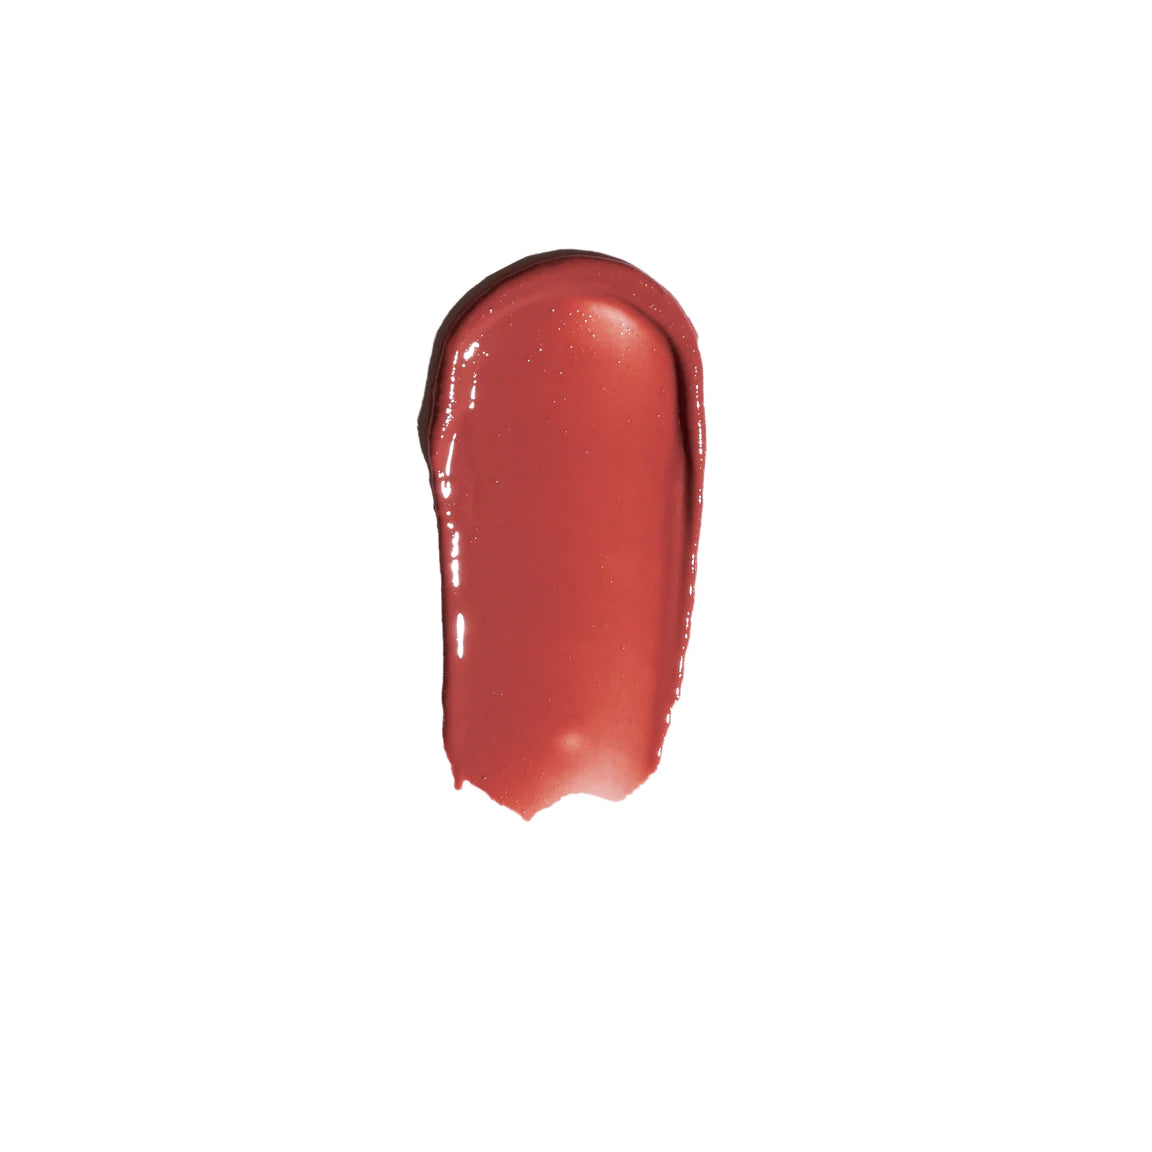 Load image into Gallery viewer, Purlisse Juicy Tint Lip Balm Nourisher
